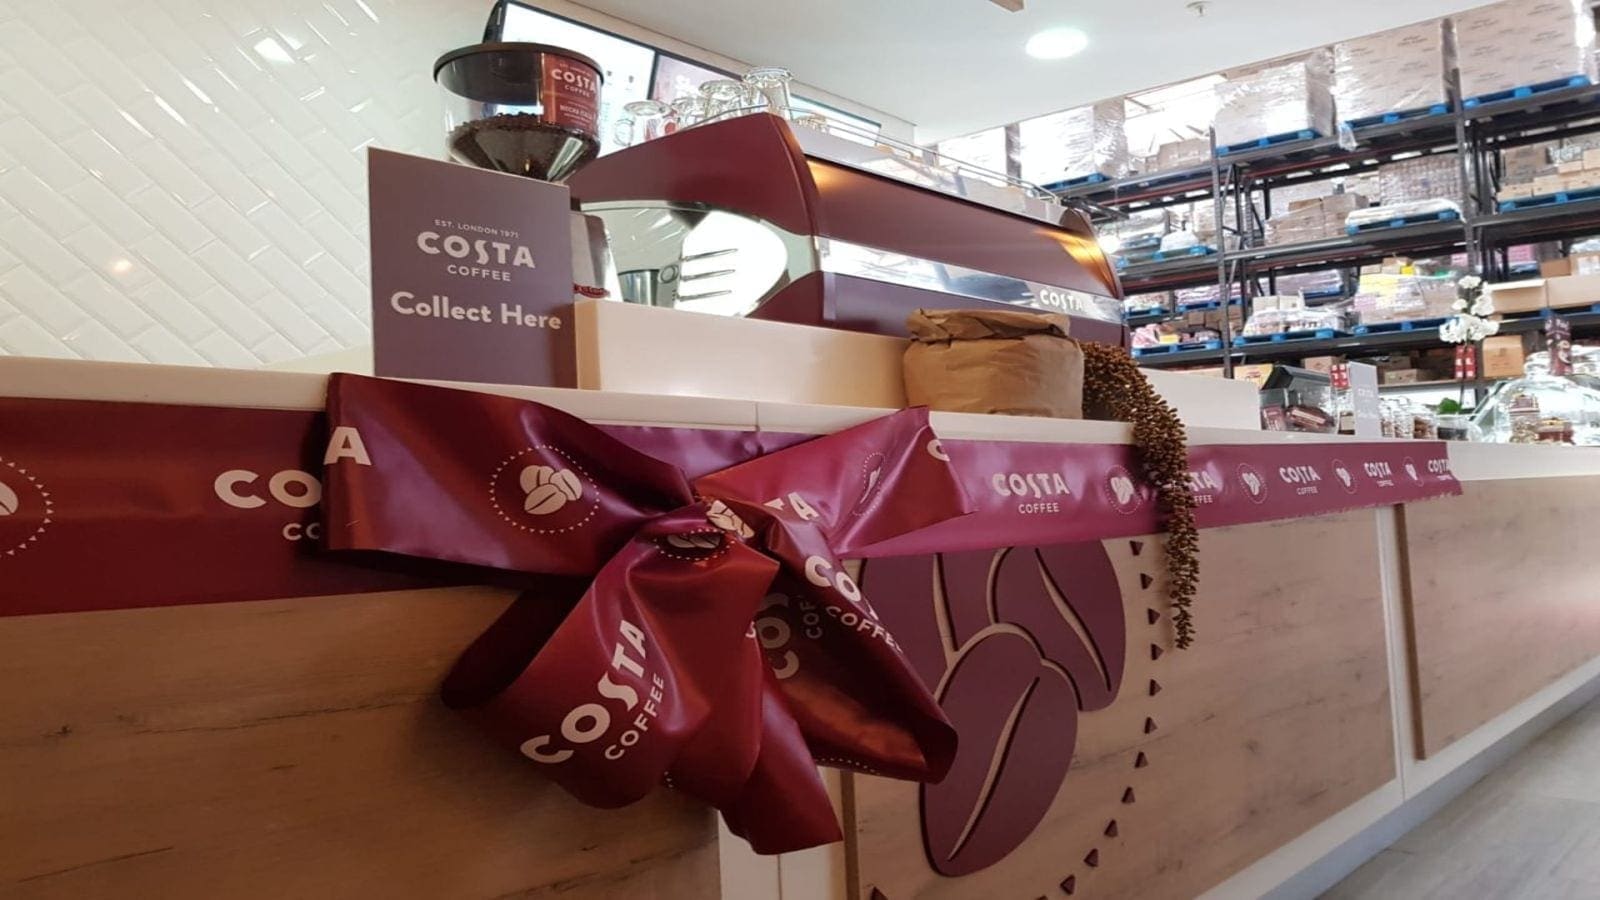 Coca-Cola Beverages South Africa opens first Costa Coffee outlet in Johannesburg